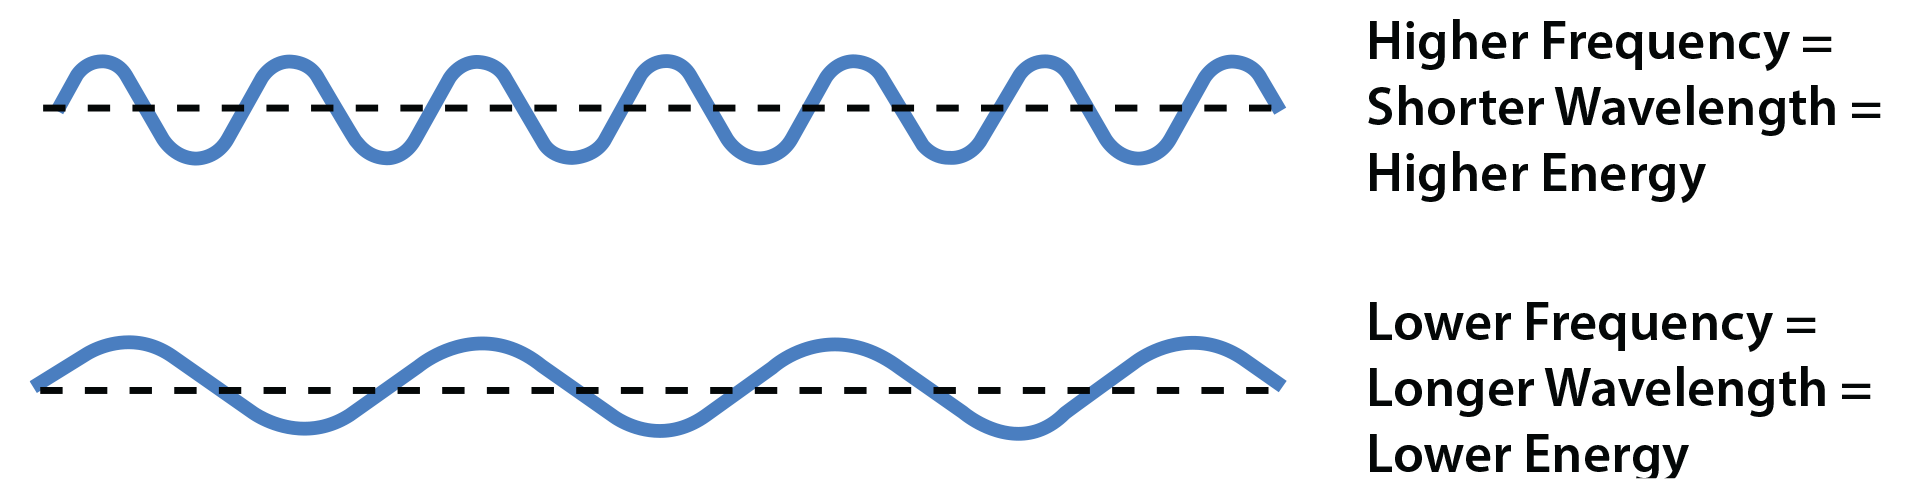 Frequency Wave PNG Free Image